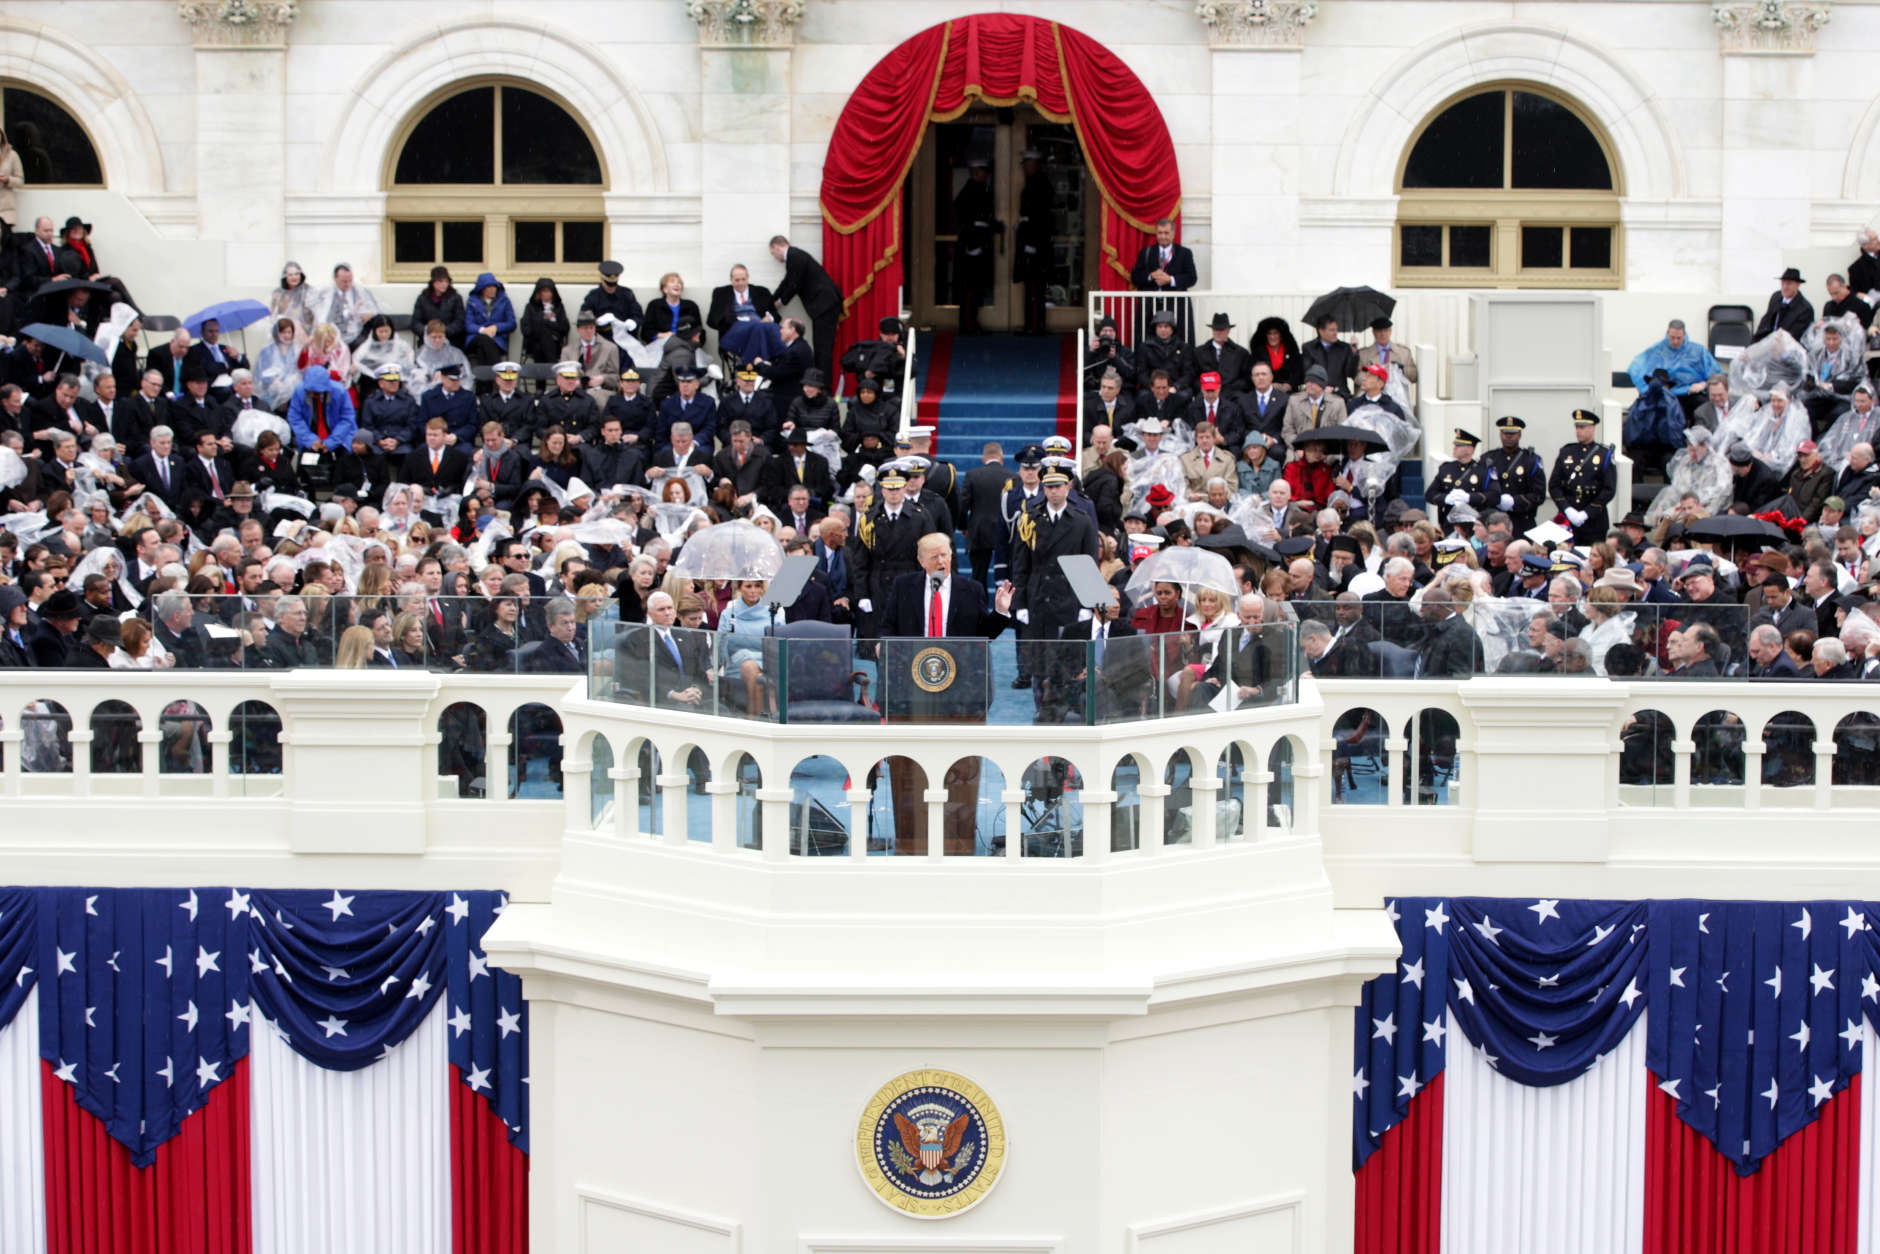 WASHINGTON, DC - JANUARY 20:  President Donald Trump delivers his inaugural address on the West Front of the U.S. Capitol on January 20, 2017 in Washington, DC. In today's inauguration ceremony Donald J. Trump becomes the 45th president of the United States.  (Photo by Alex Wong/Getty Images)